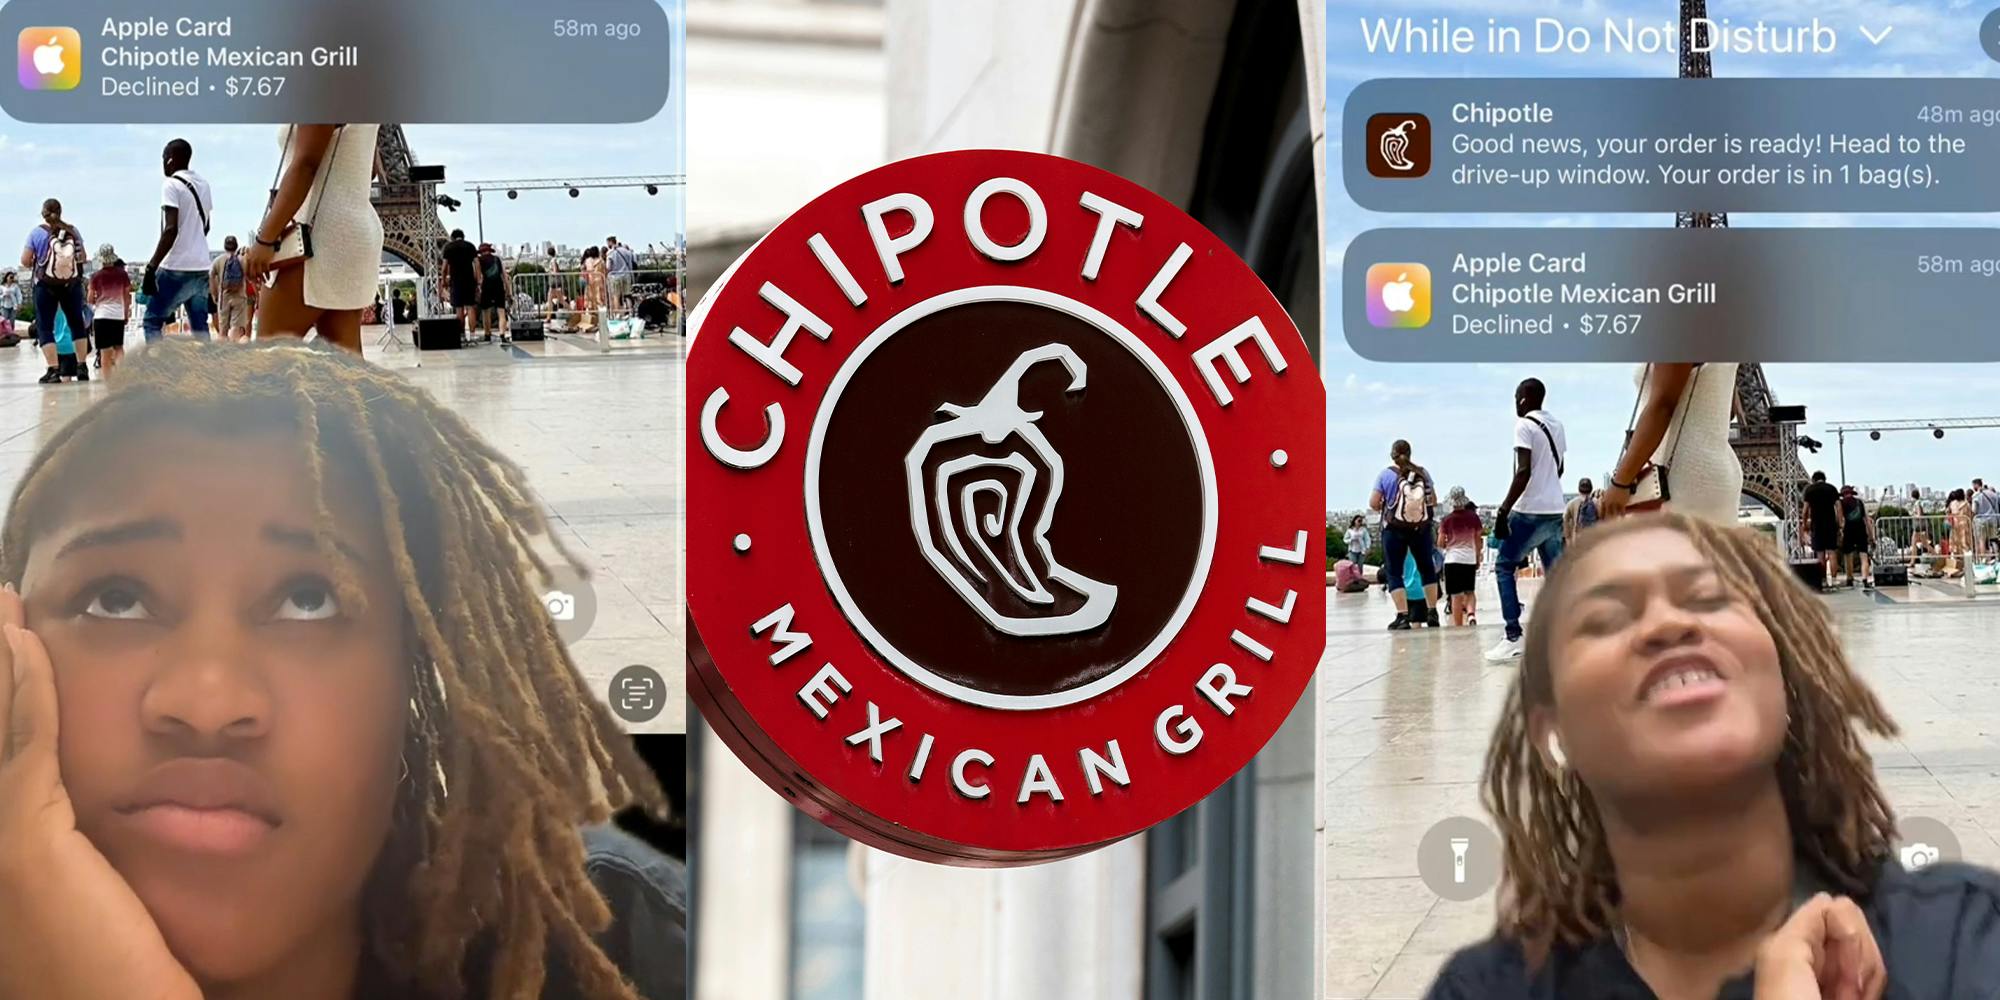 Customer's Apple Card declines after placing Chipotle mobile order. But she still gets her food